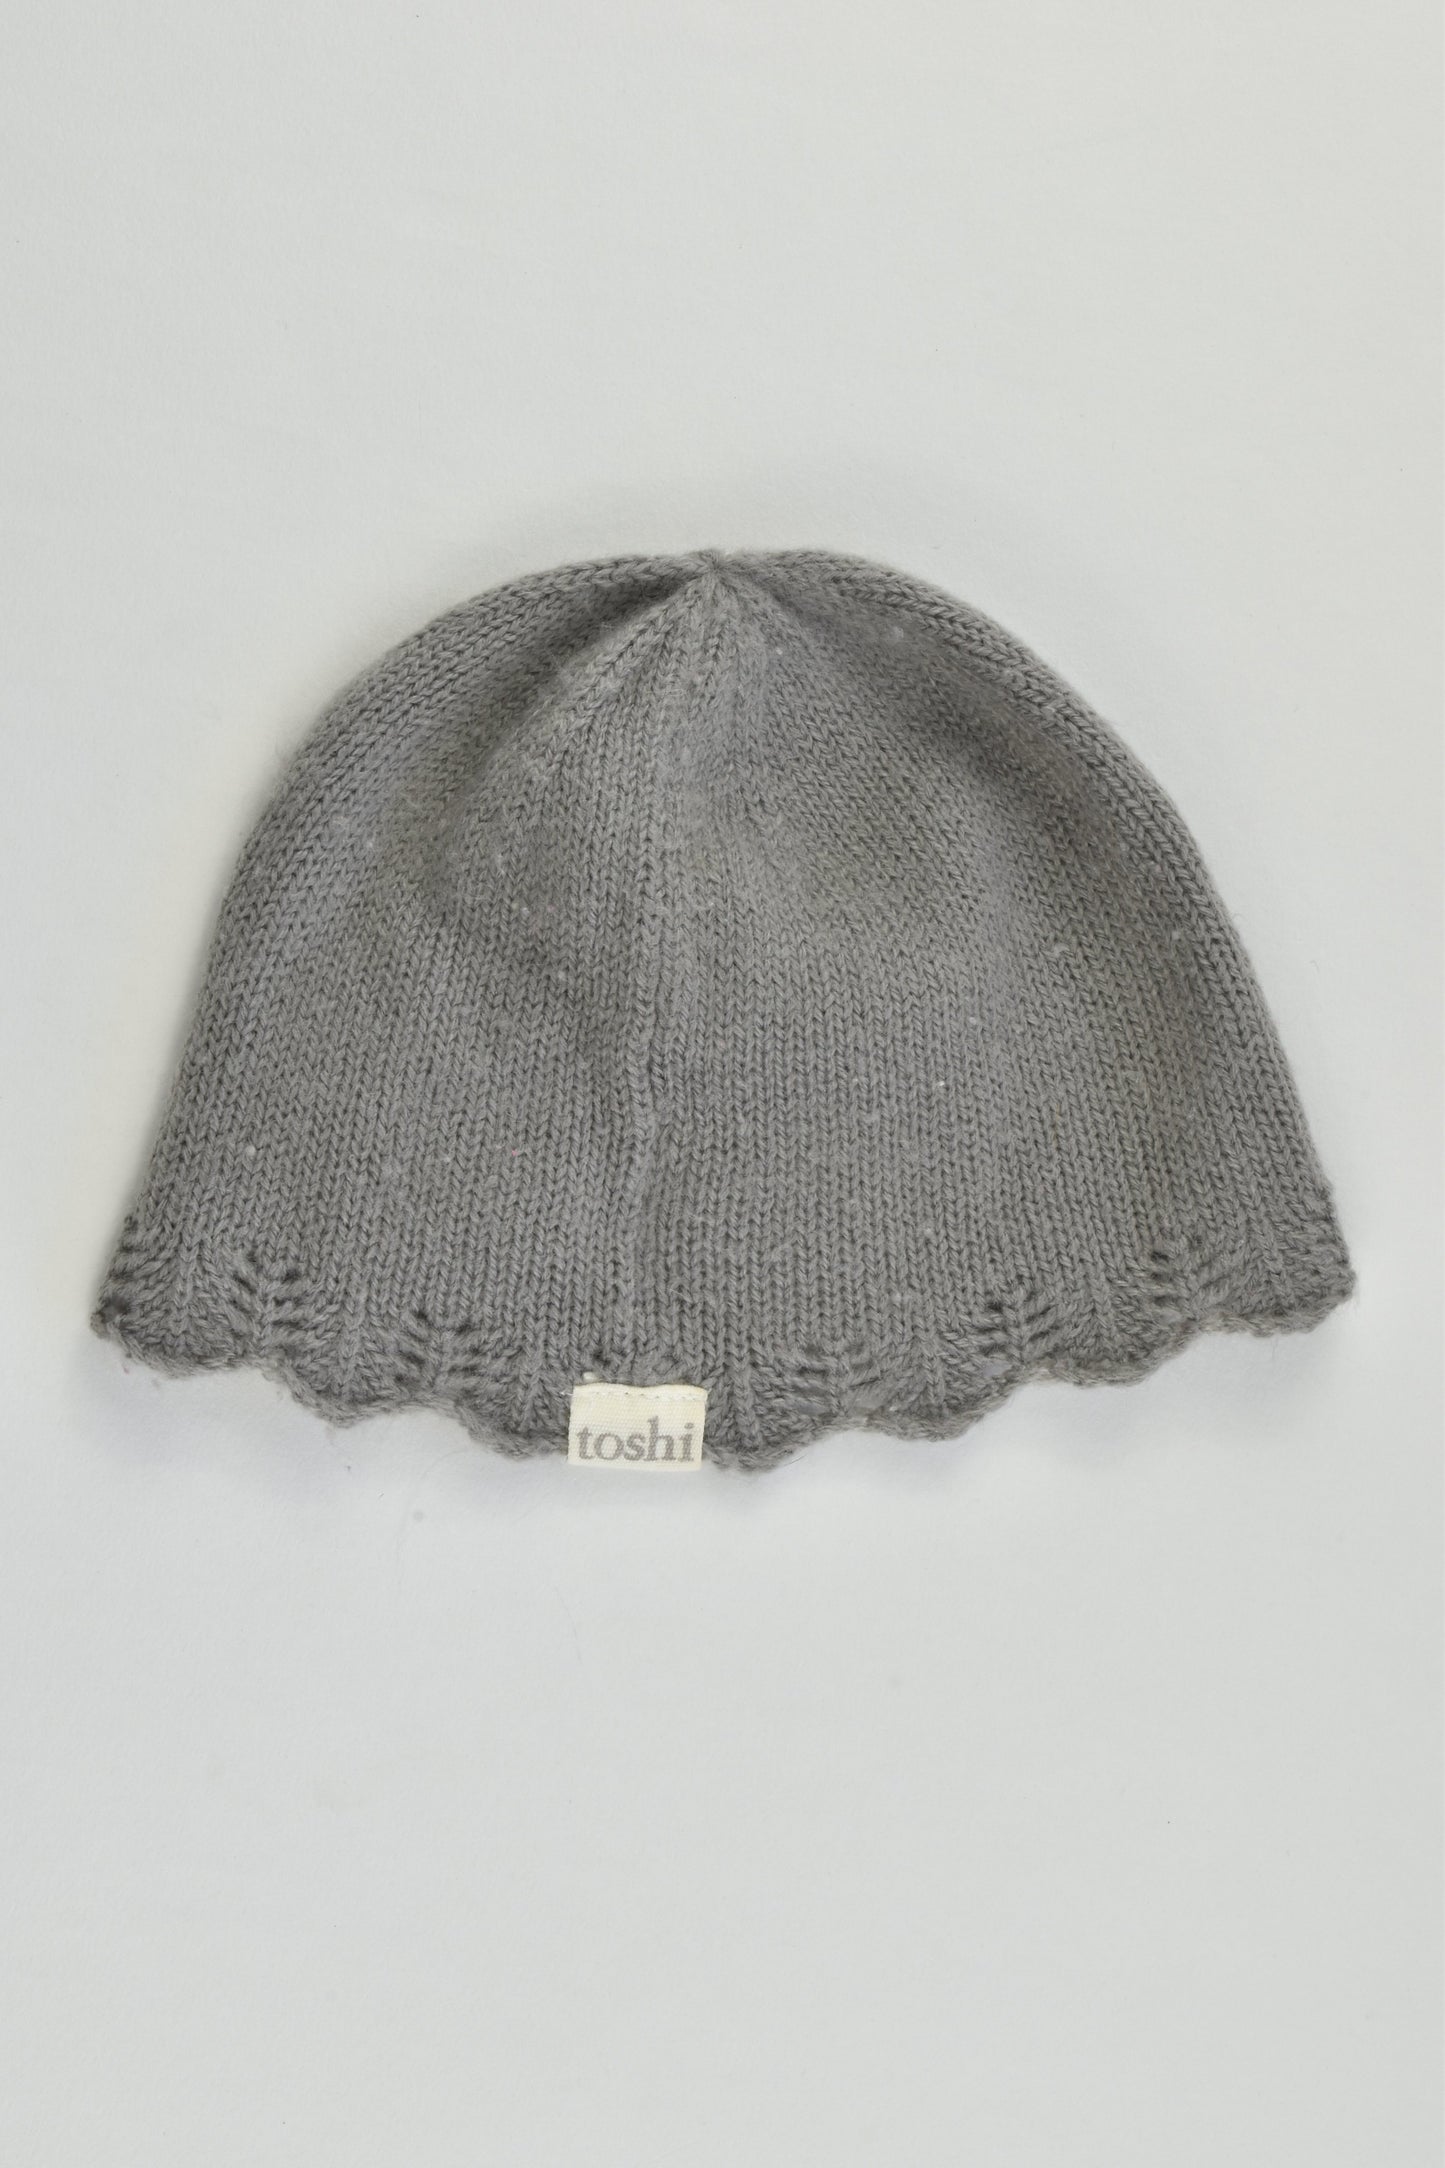 Toshi Size XS (Up to 8 months) Knitted Beanie